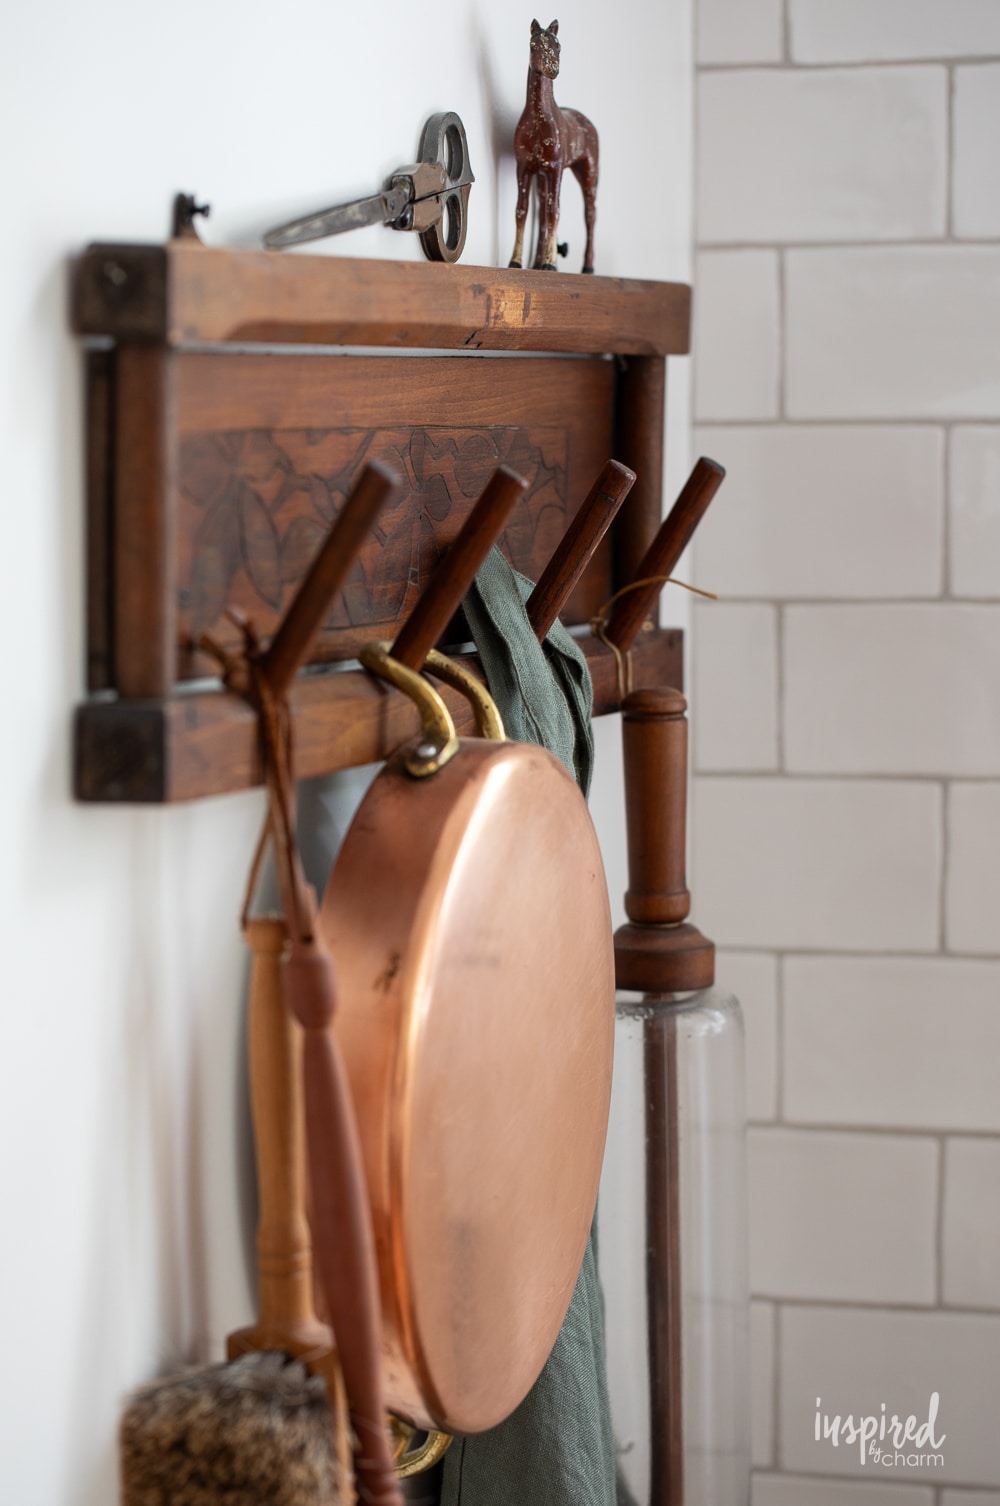 close up of a vintage wood rack hung on a wall with copper pan, rolling pin, and an apron.